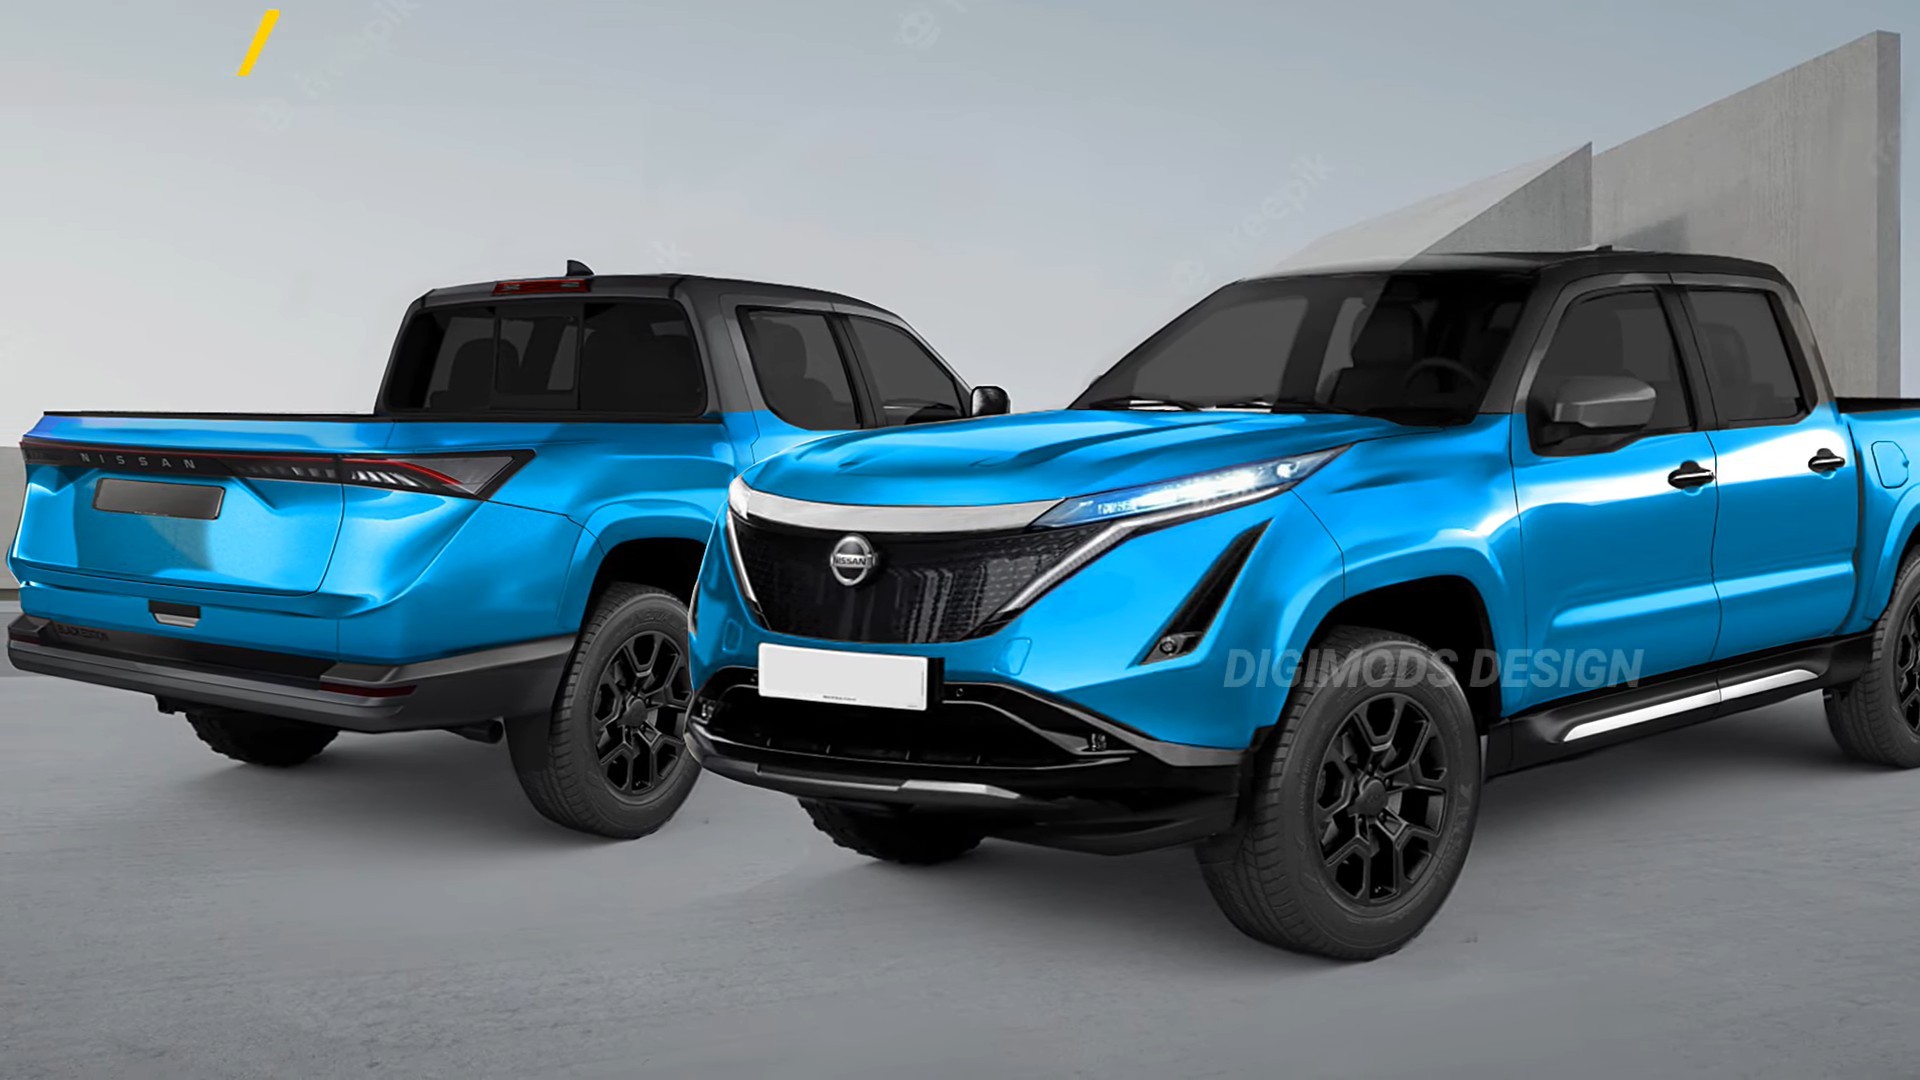 The New 2024 Nissan Navara Revealed - Comes with new Hybrid and e-Power  technology? 